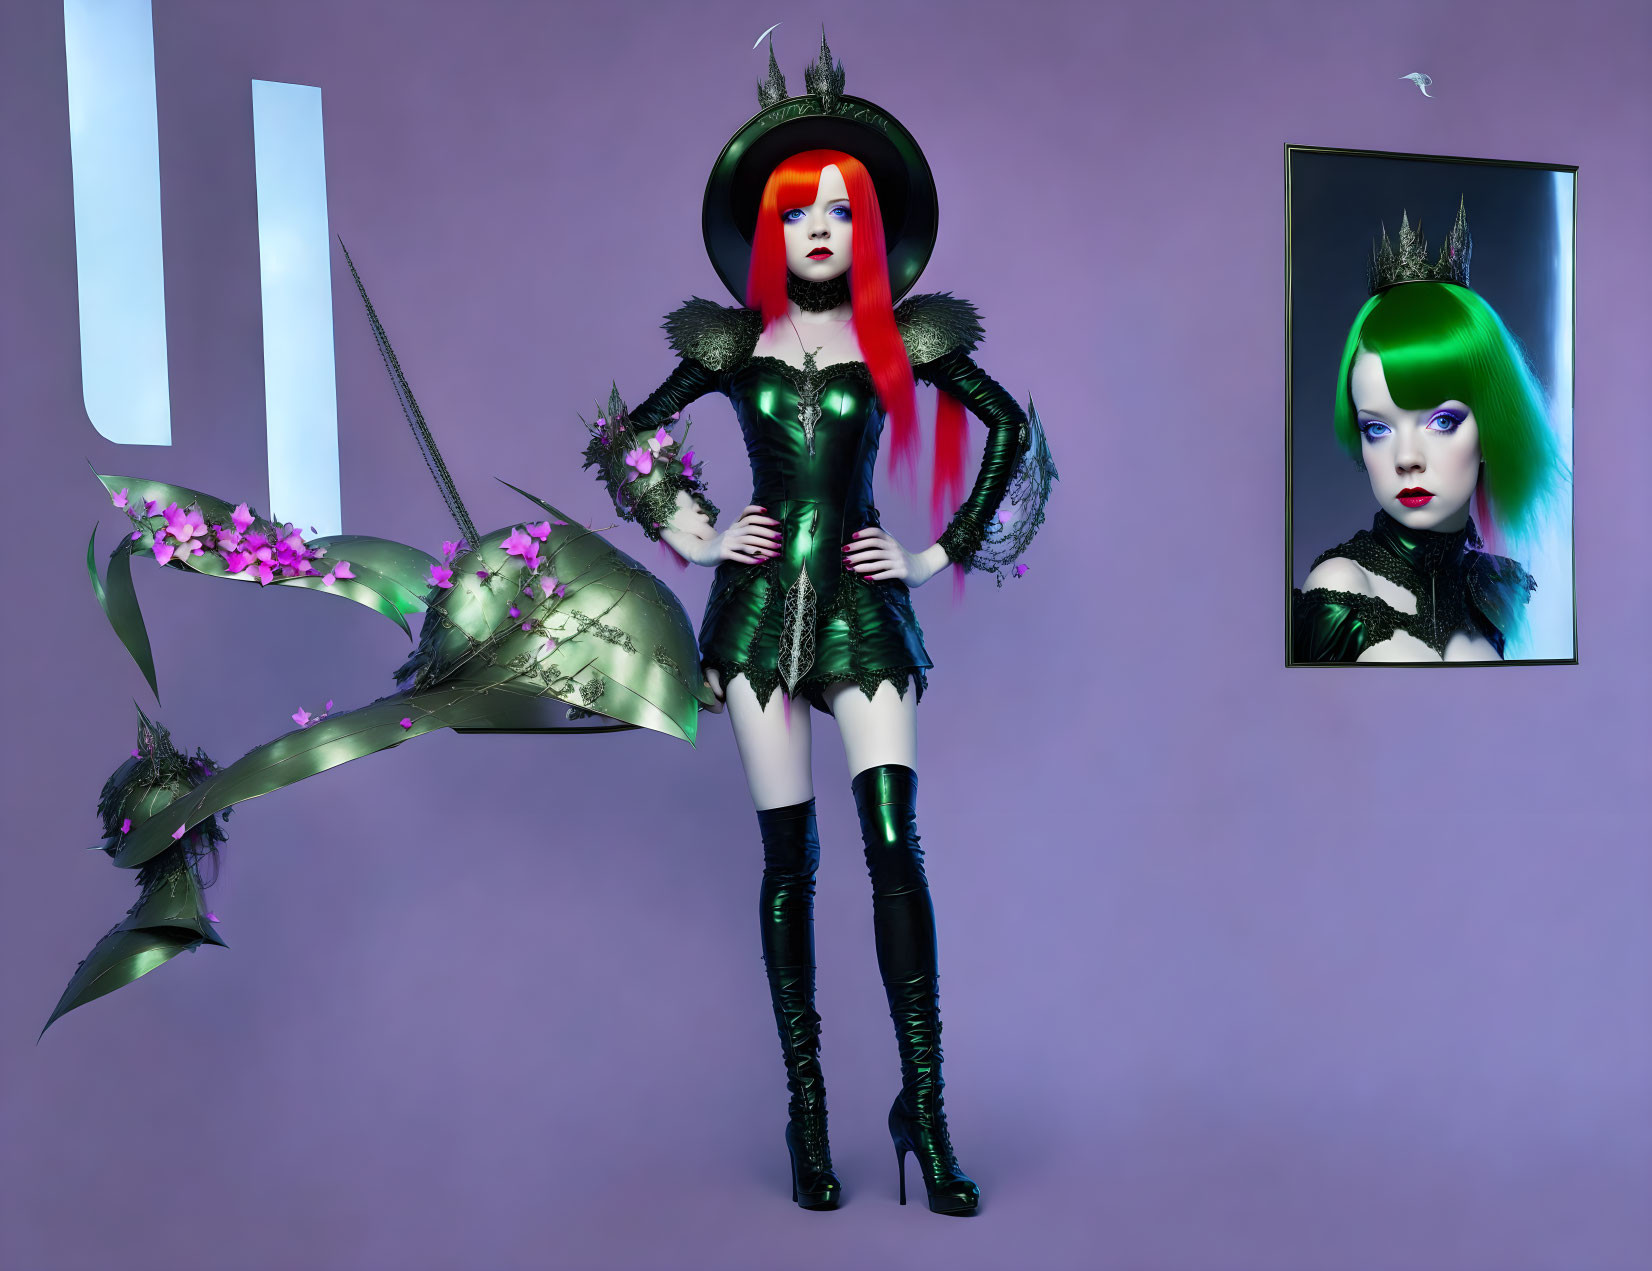 Stylized character in black gothic outfit with dragon-like creature and portrait